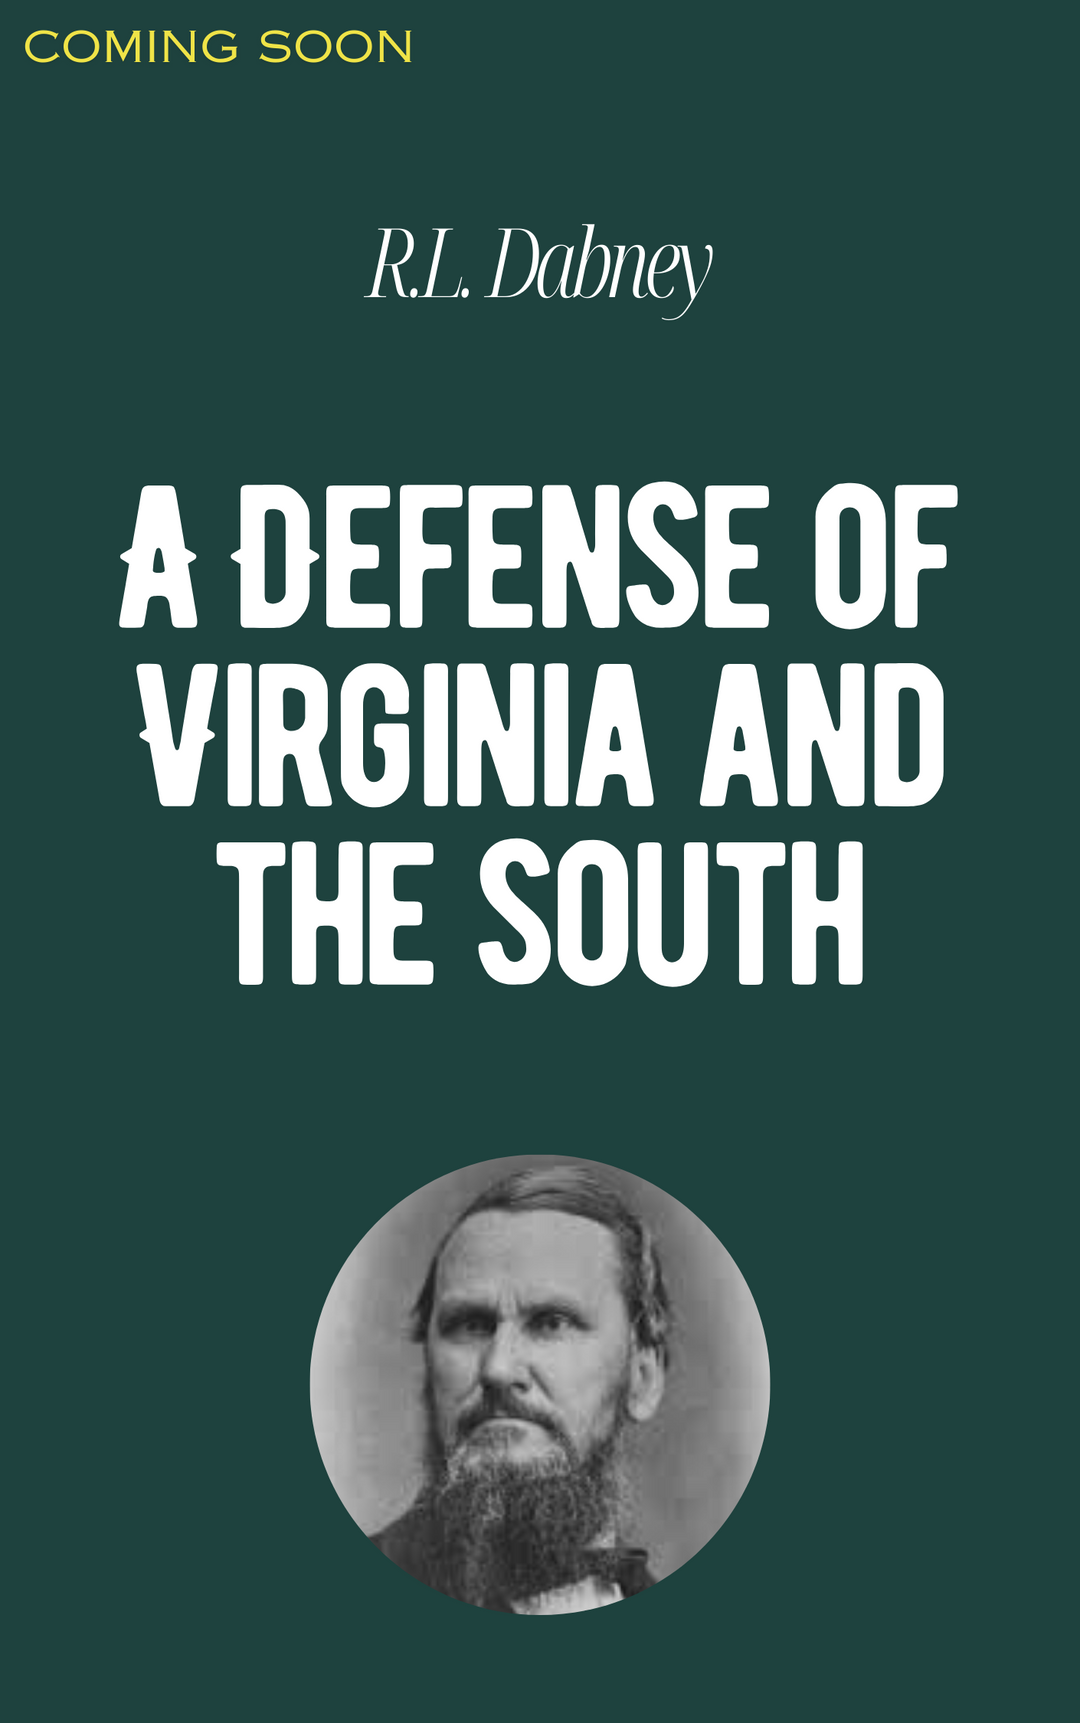 A Defense of Virginia and the South